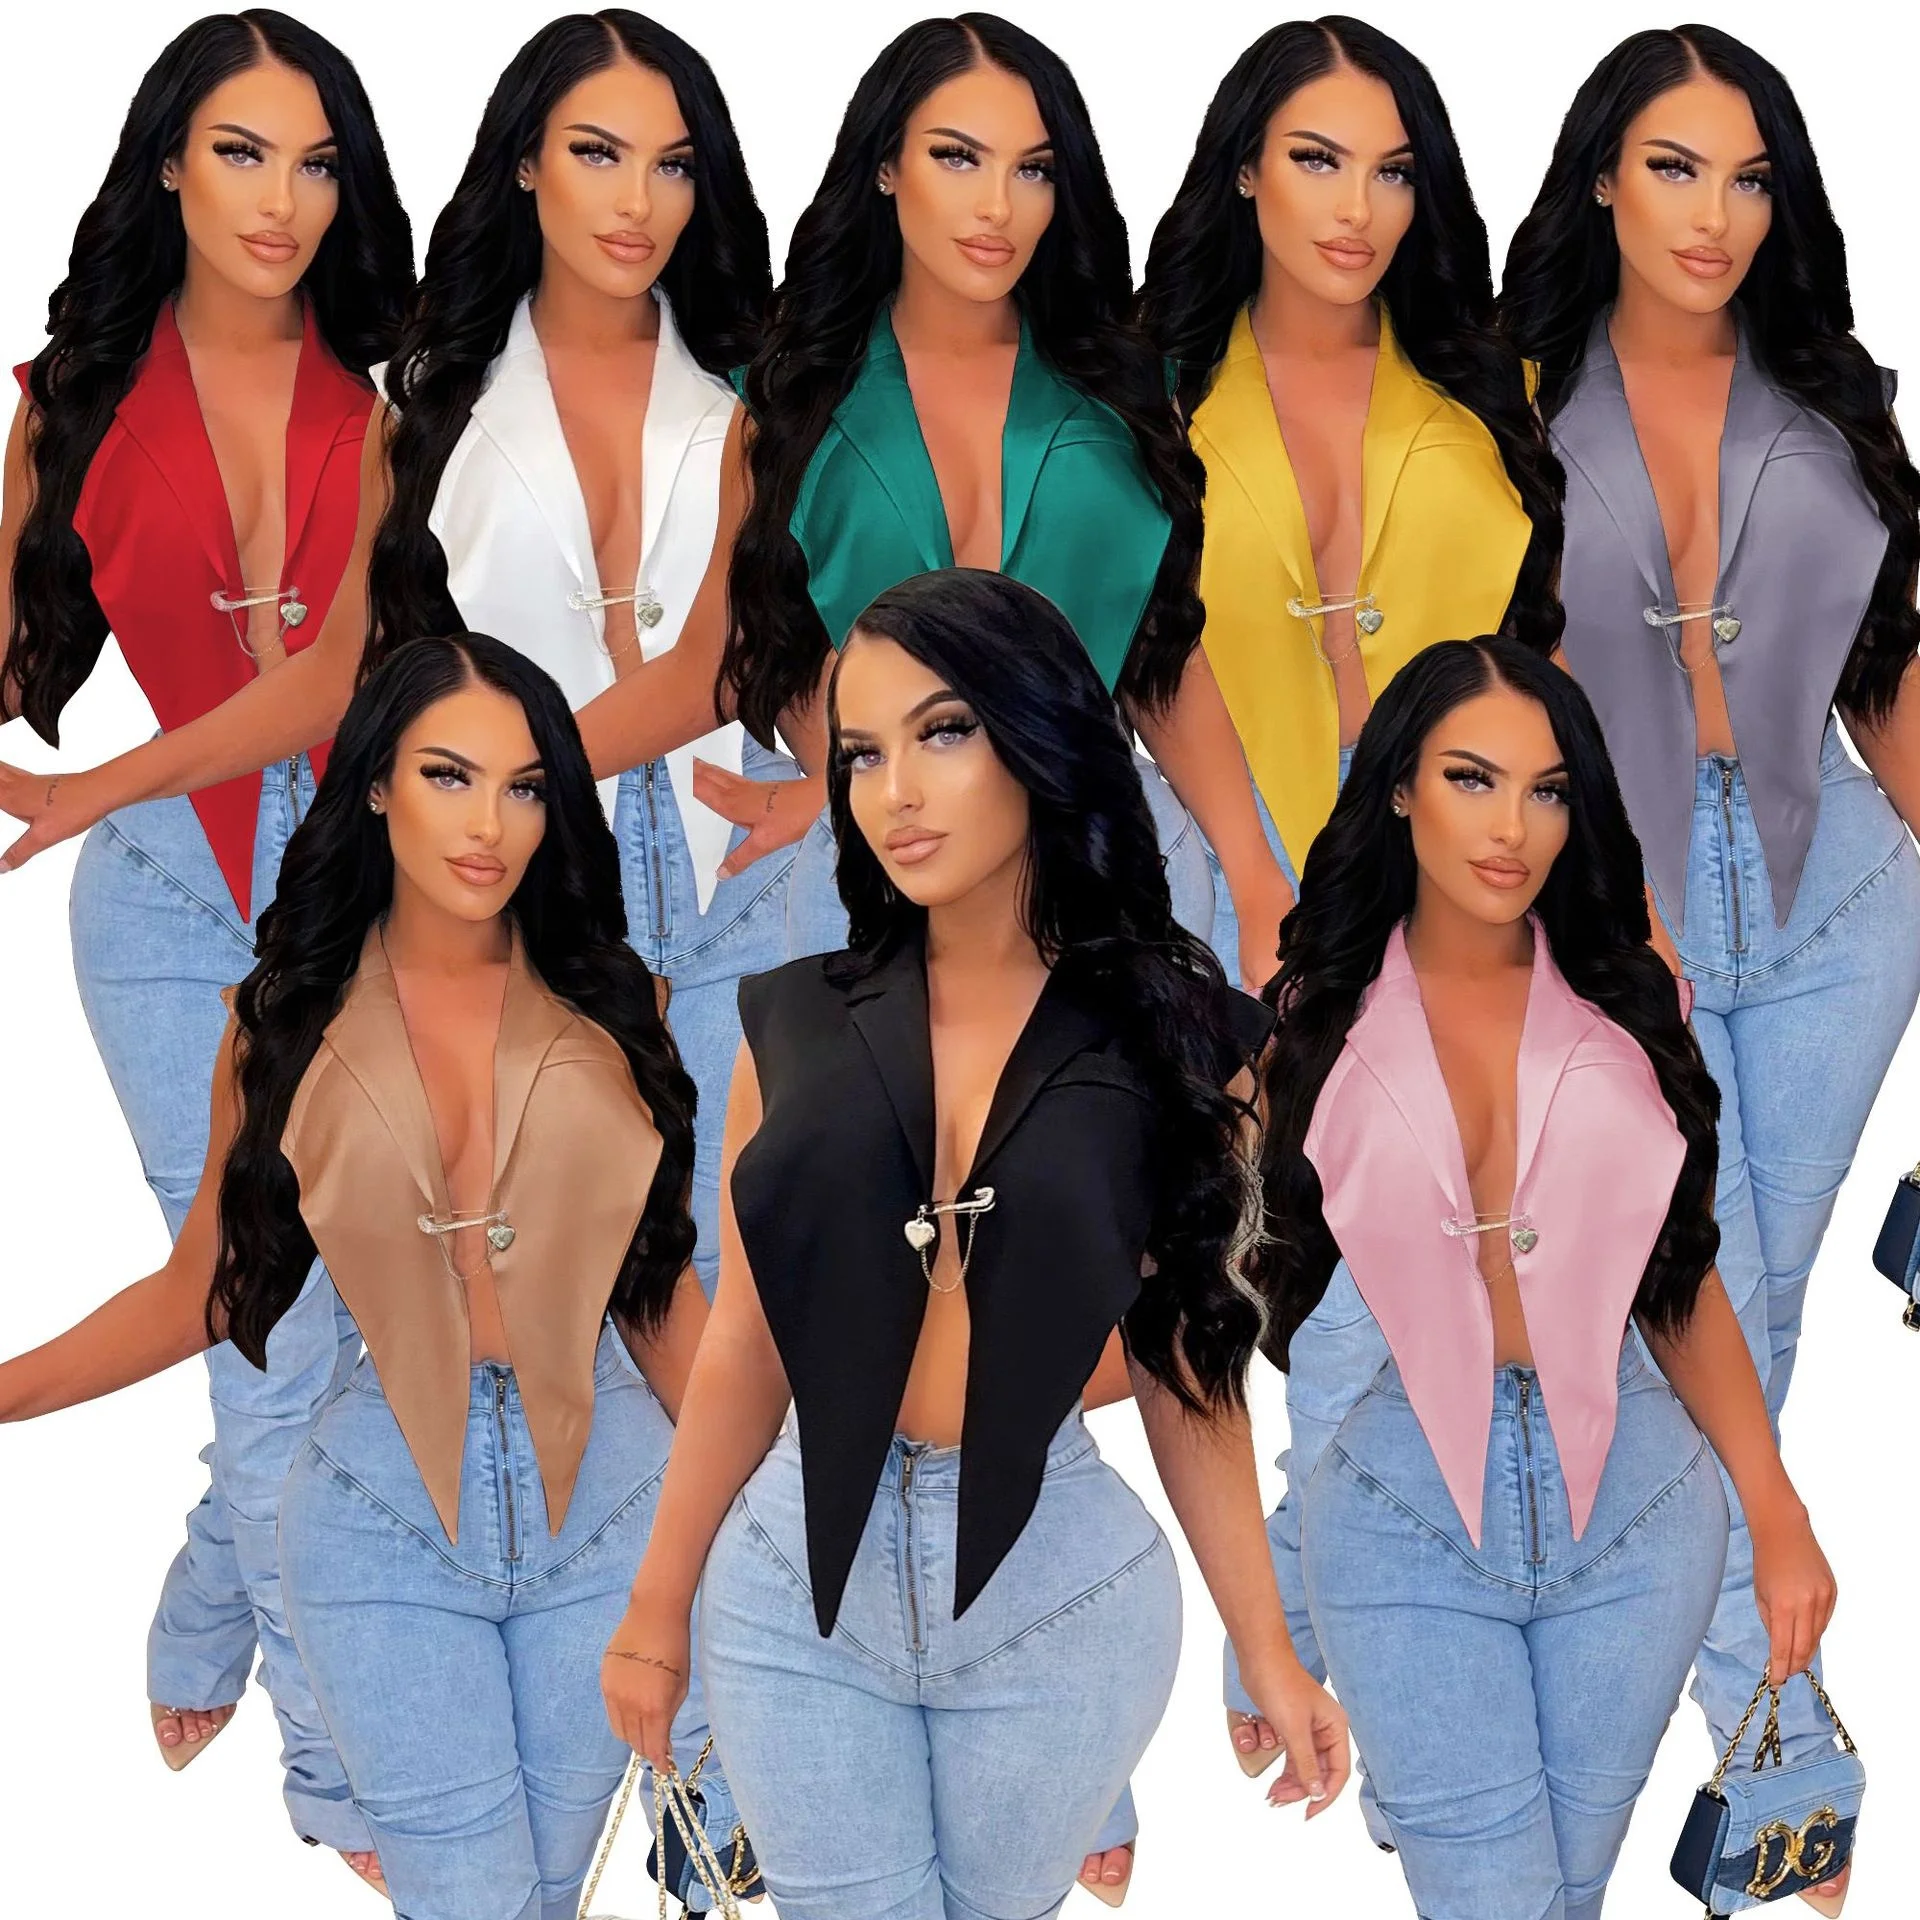 

LANOZY 2022 New Trend Sexy Solid Color Splicing Turn Down Collar Crop Top Women Summer Blazers Tank Tops, Eight colors